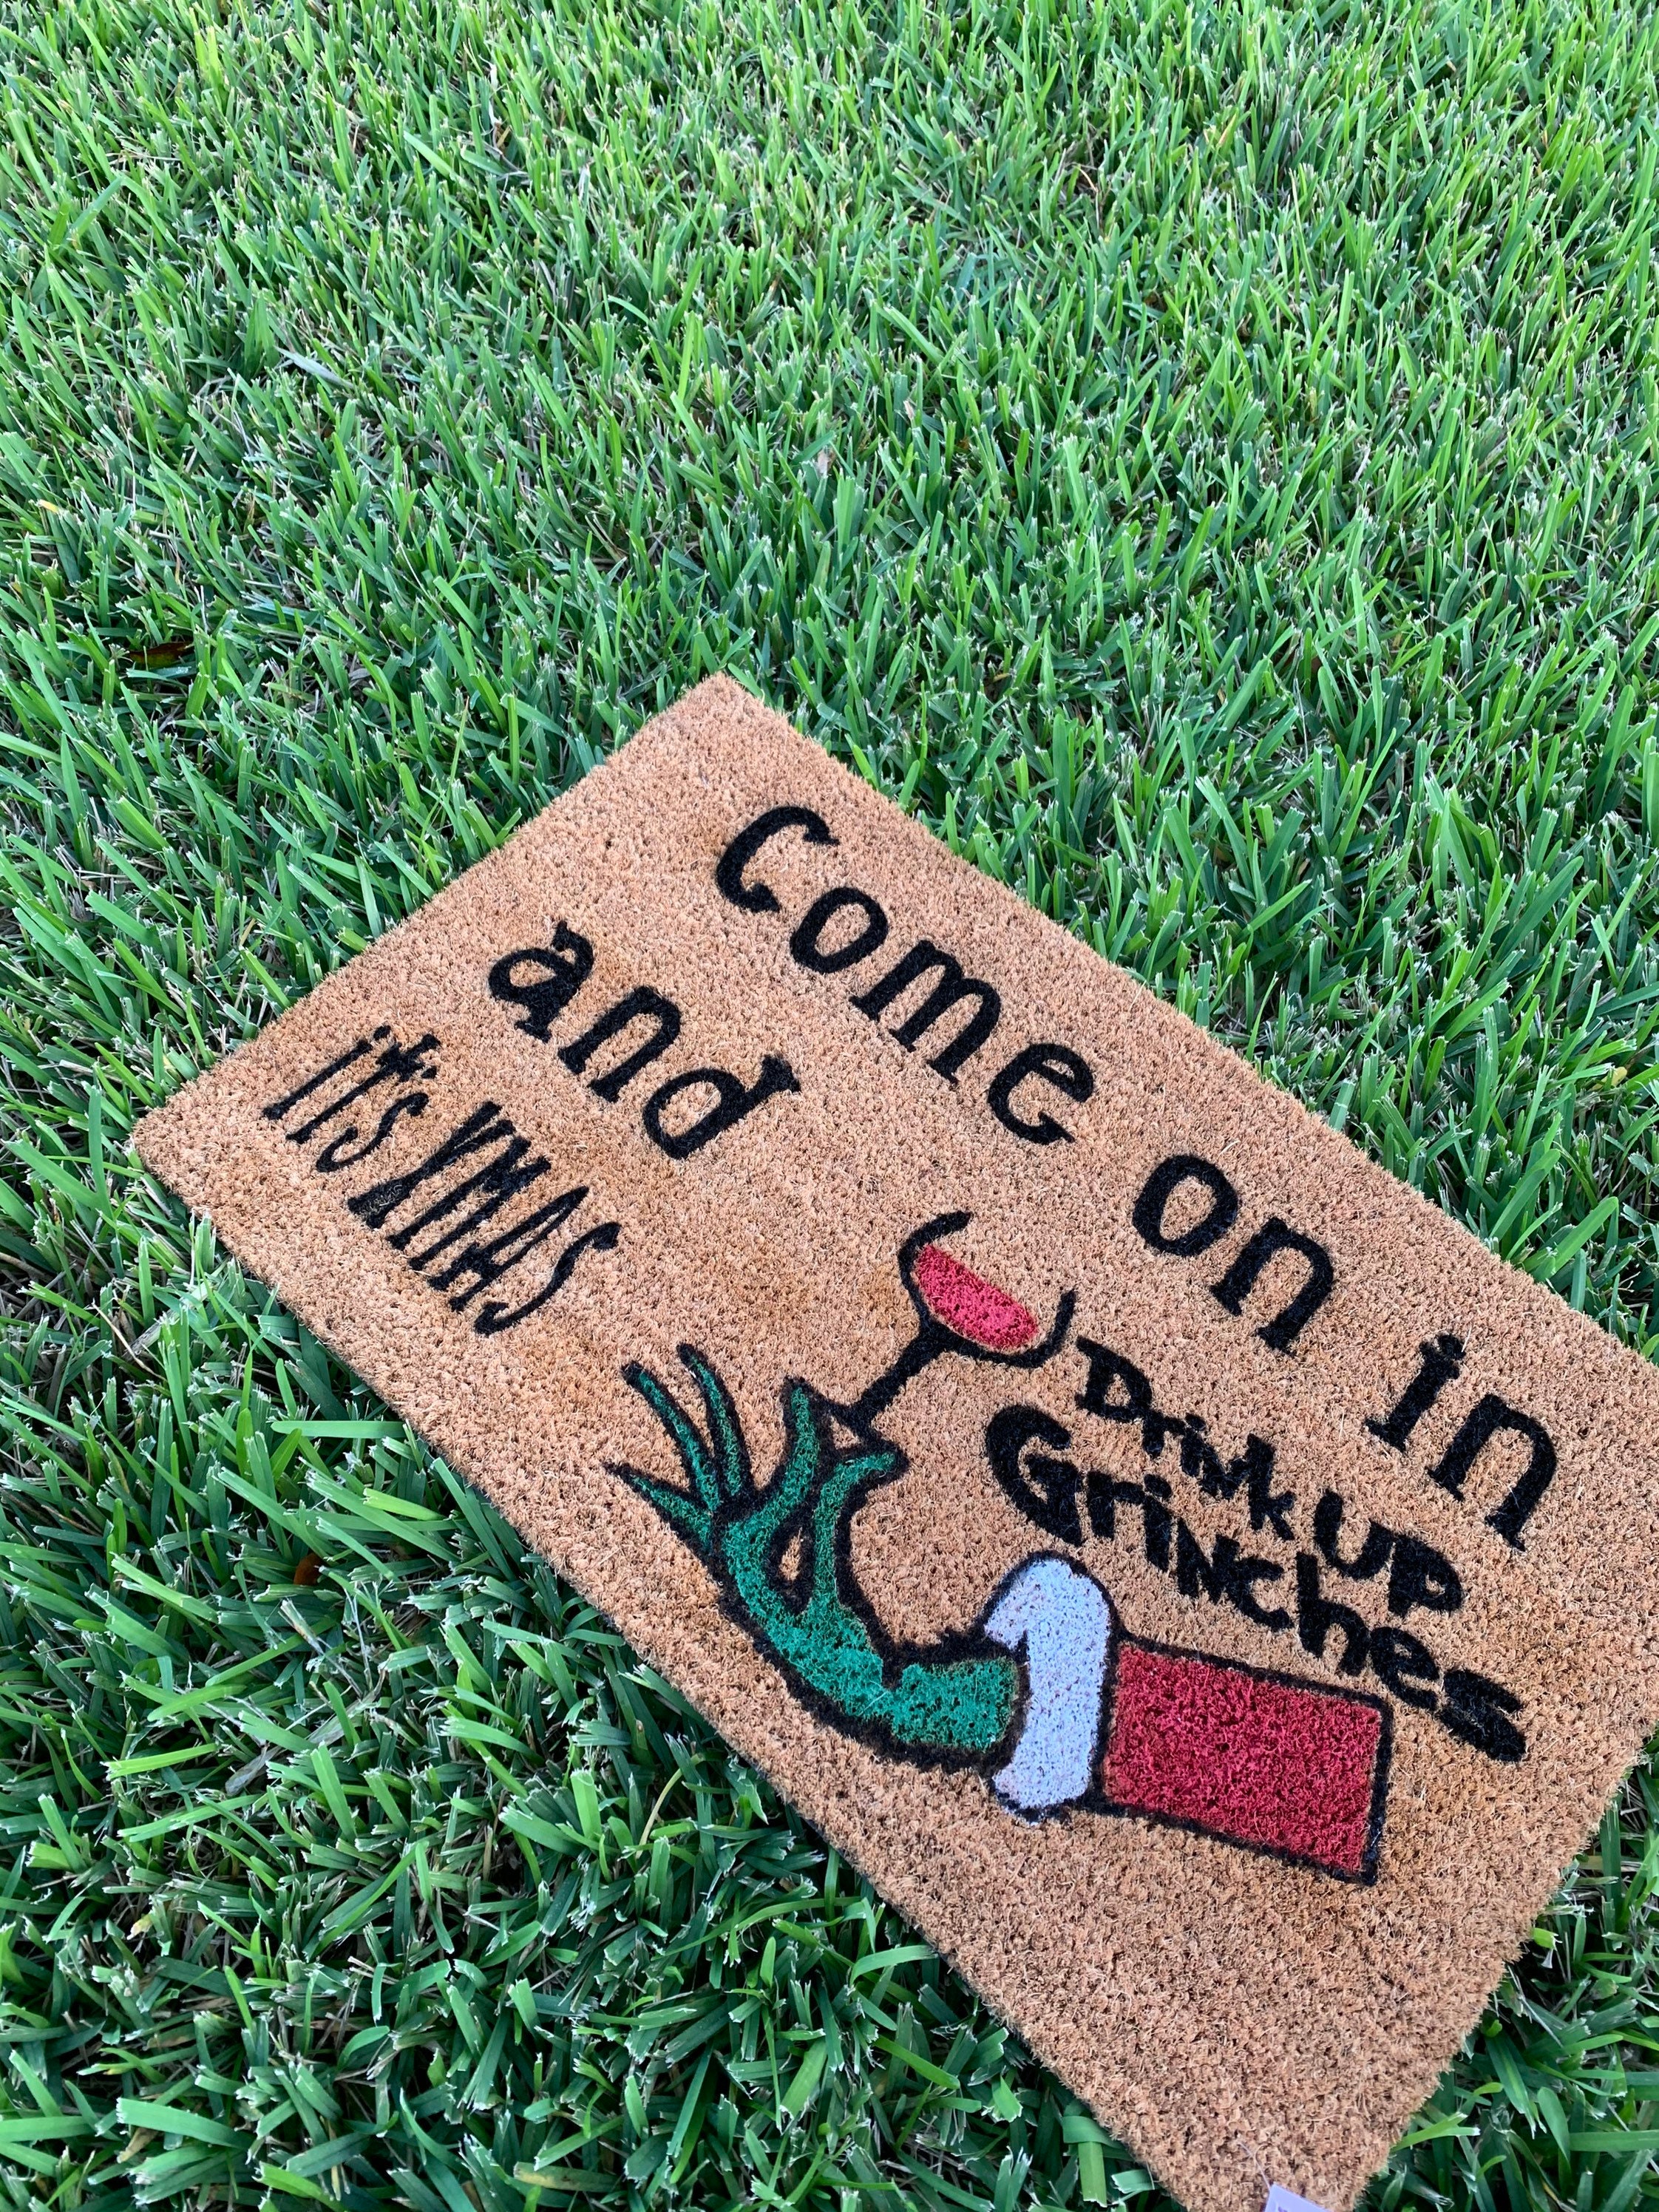 Wine Doormat Come On In And Drink Up Best Christmas Gifts 2020 Grinch 